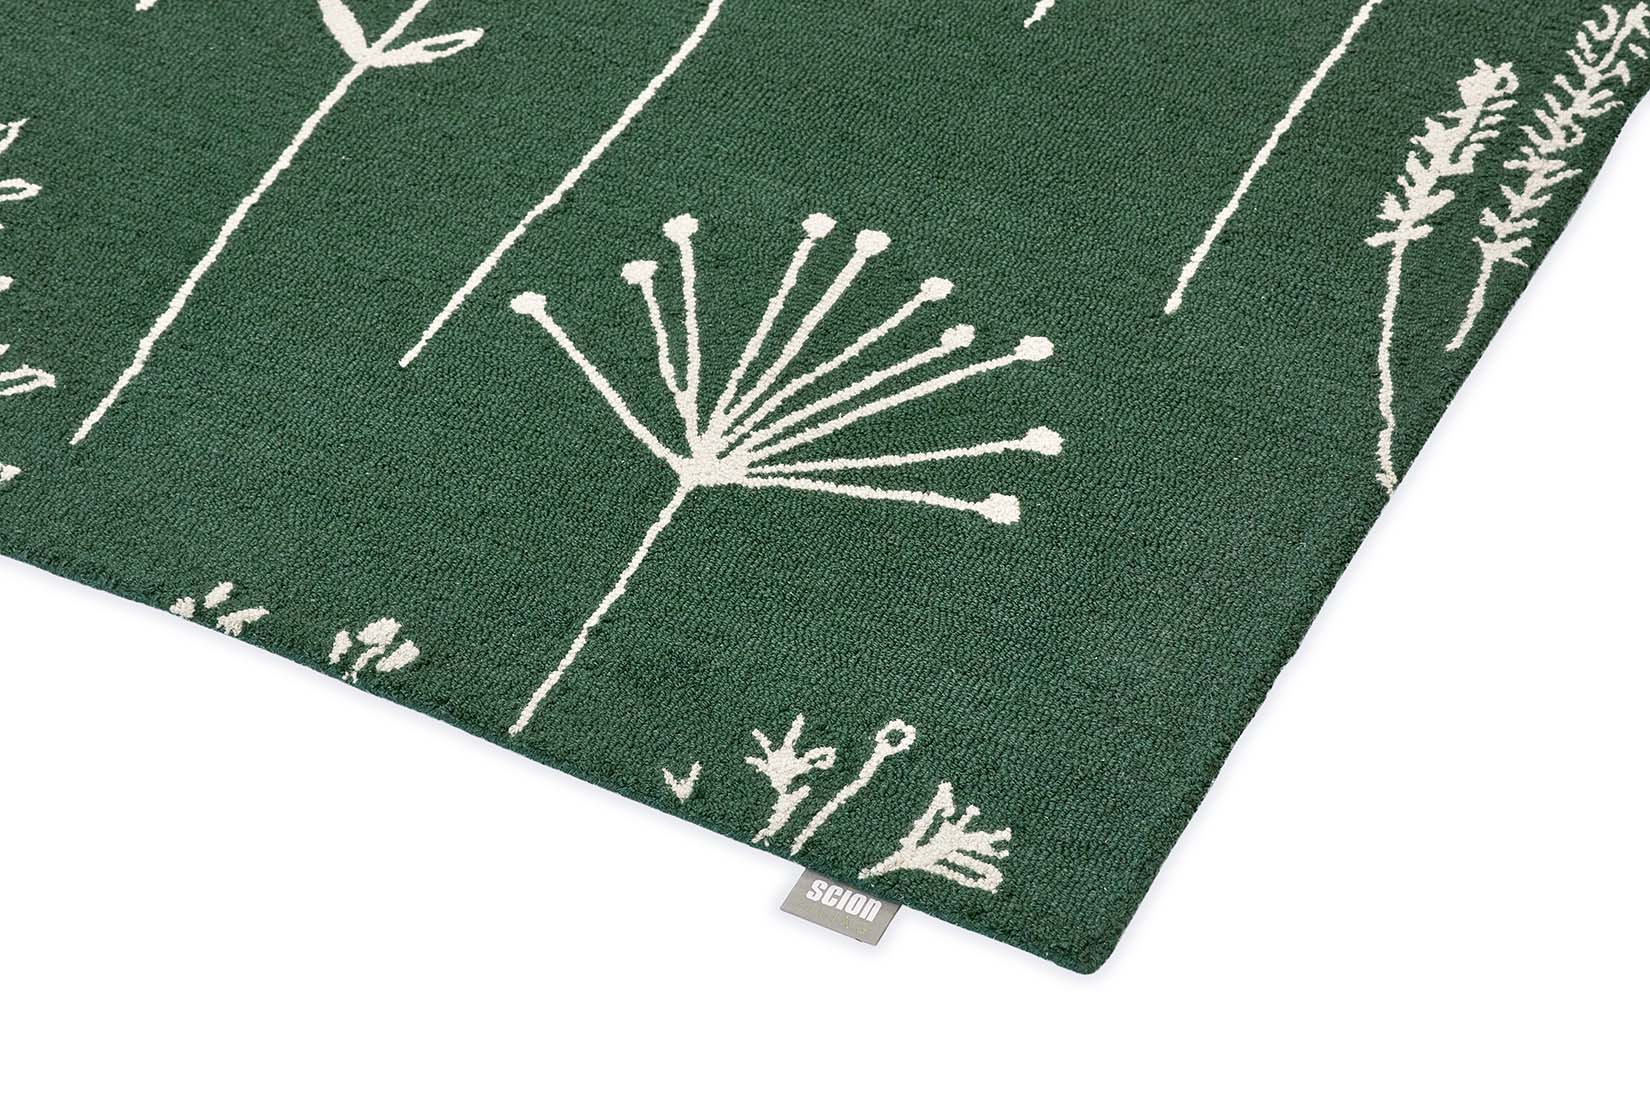 floral printed rug in green and ivory
